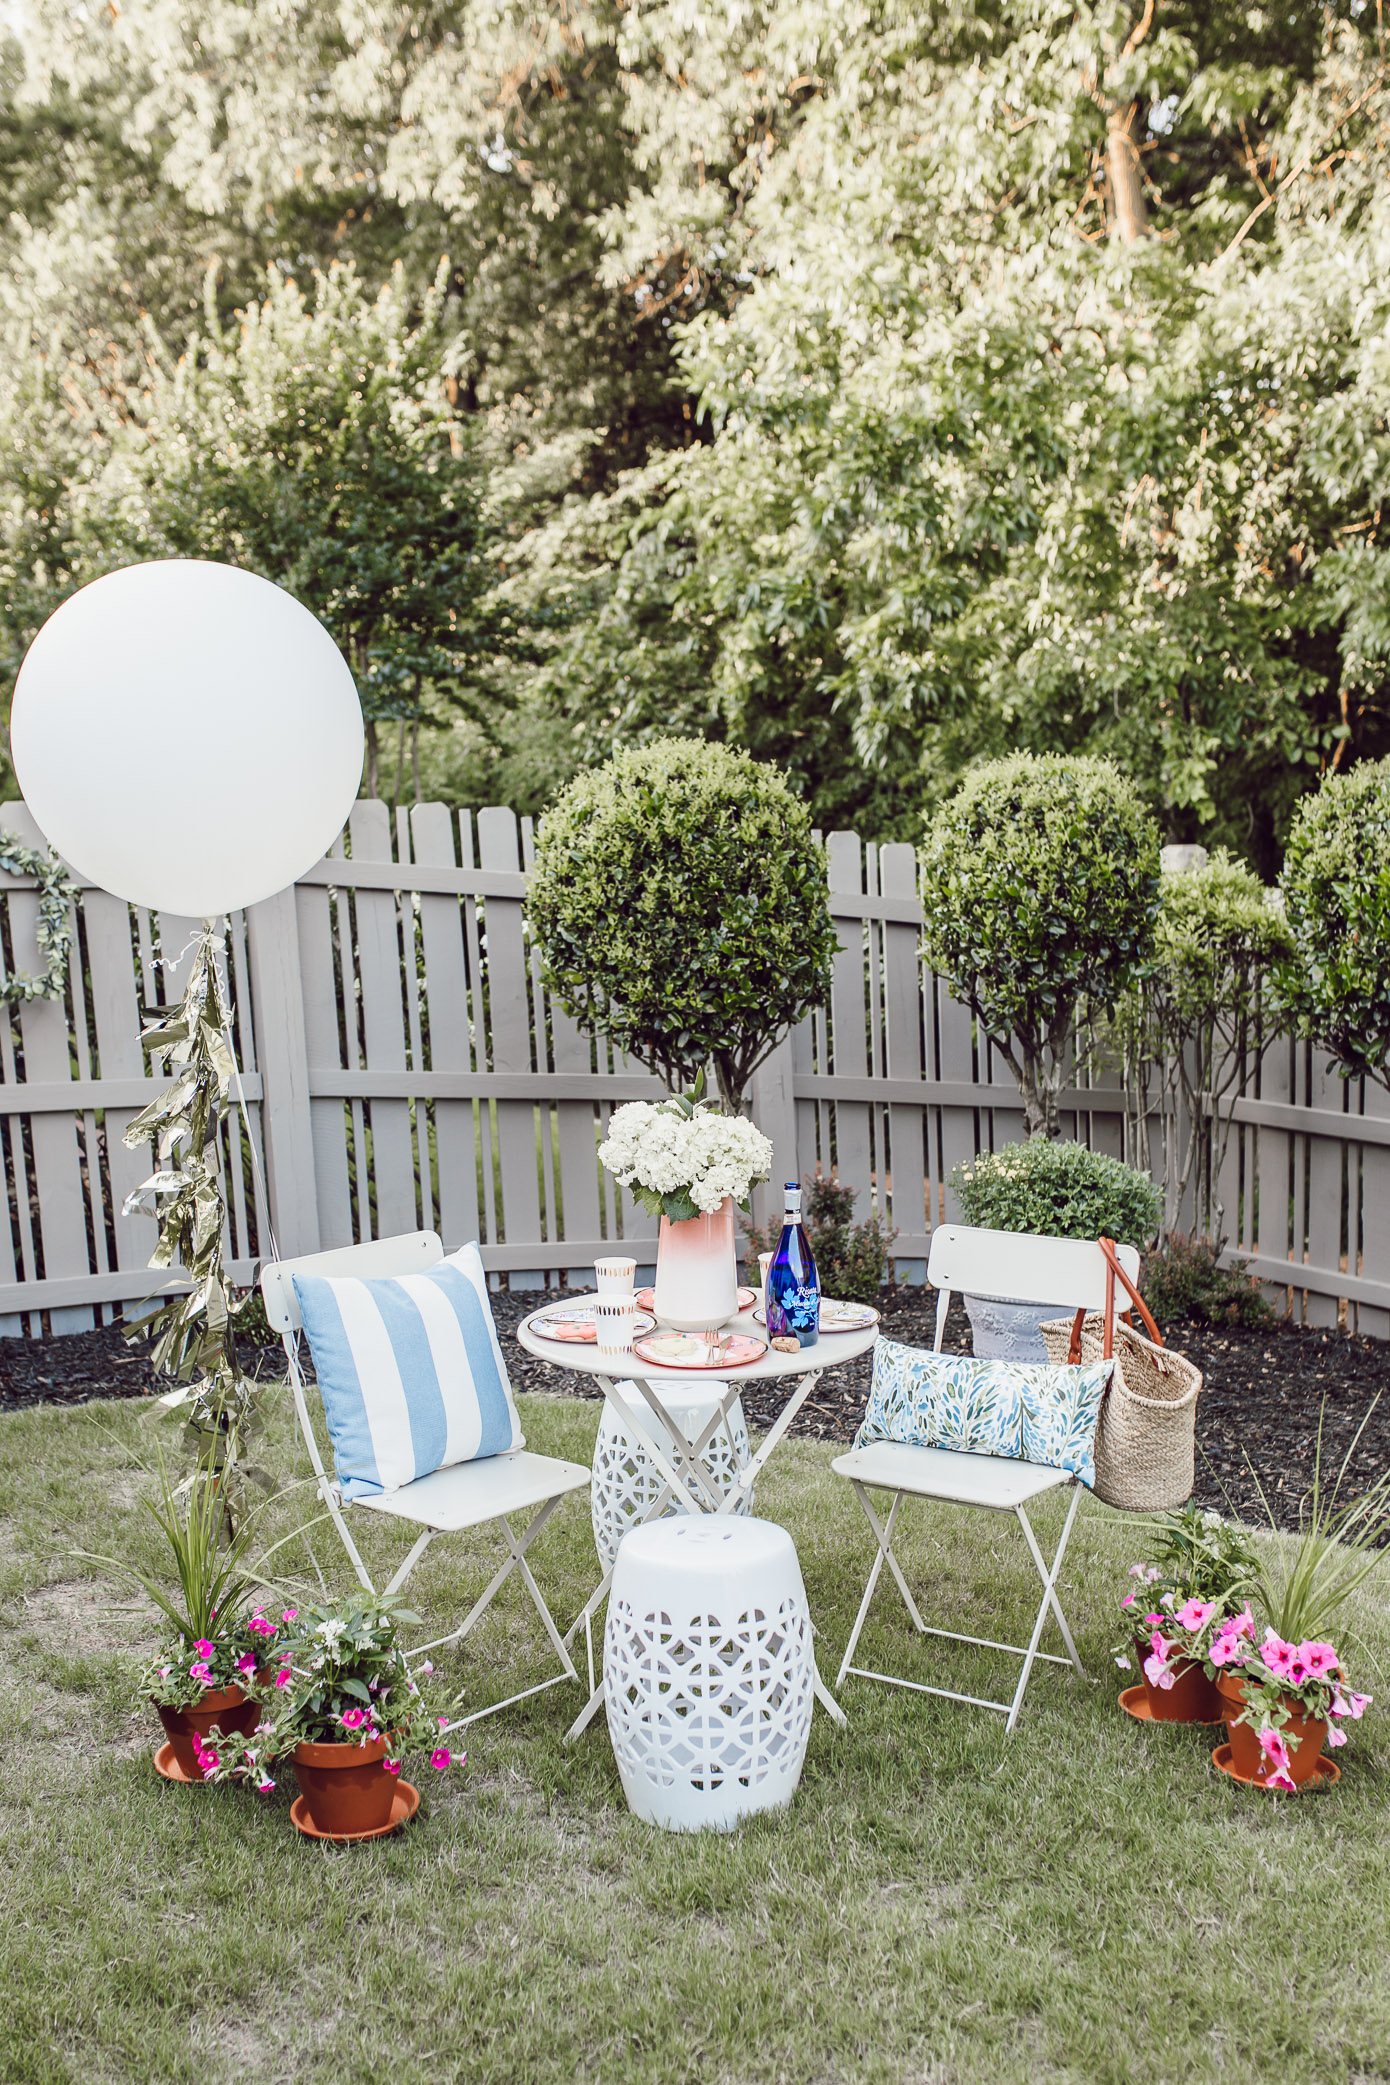 How to Decorate Your Backyard for Garden Party | Louella Reese